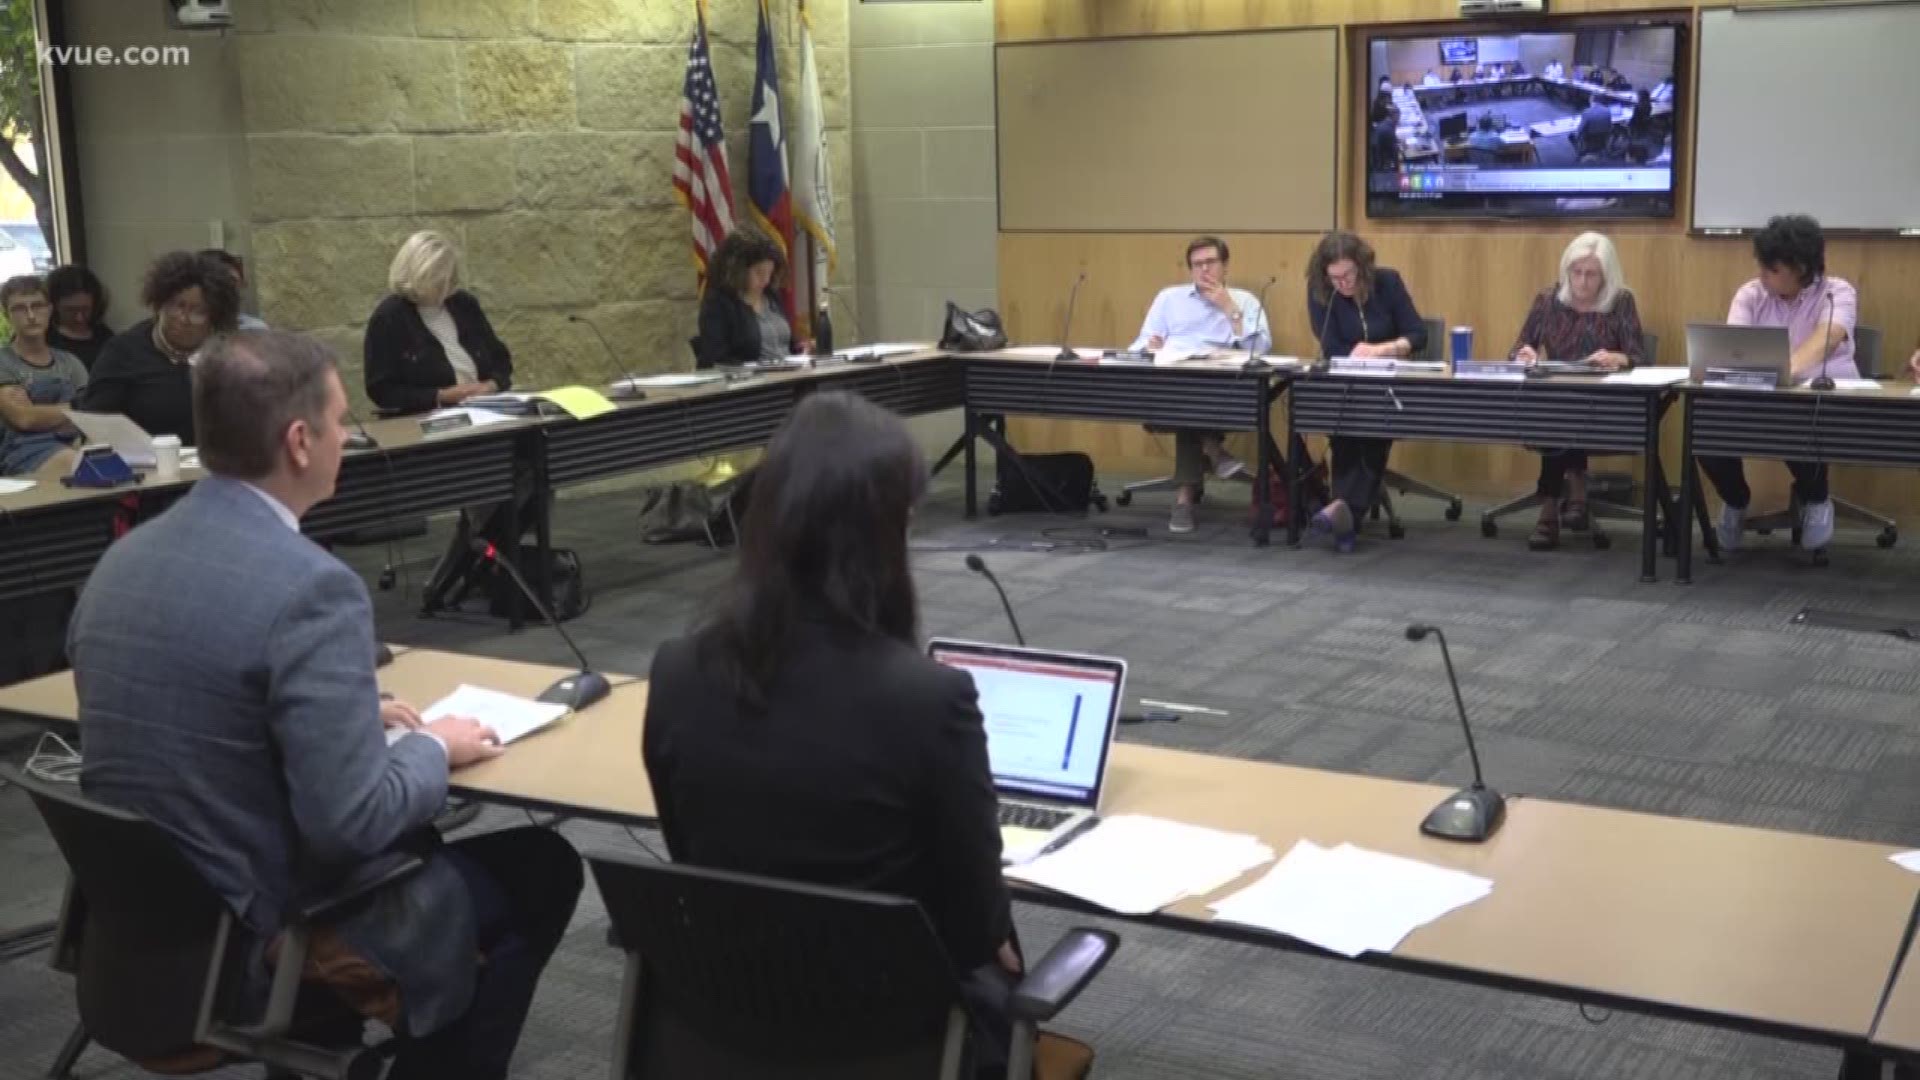 Should the City of Austin have a softer touch when it comes to dealing with homeless people? That's the debate city leaders are taking up.